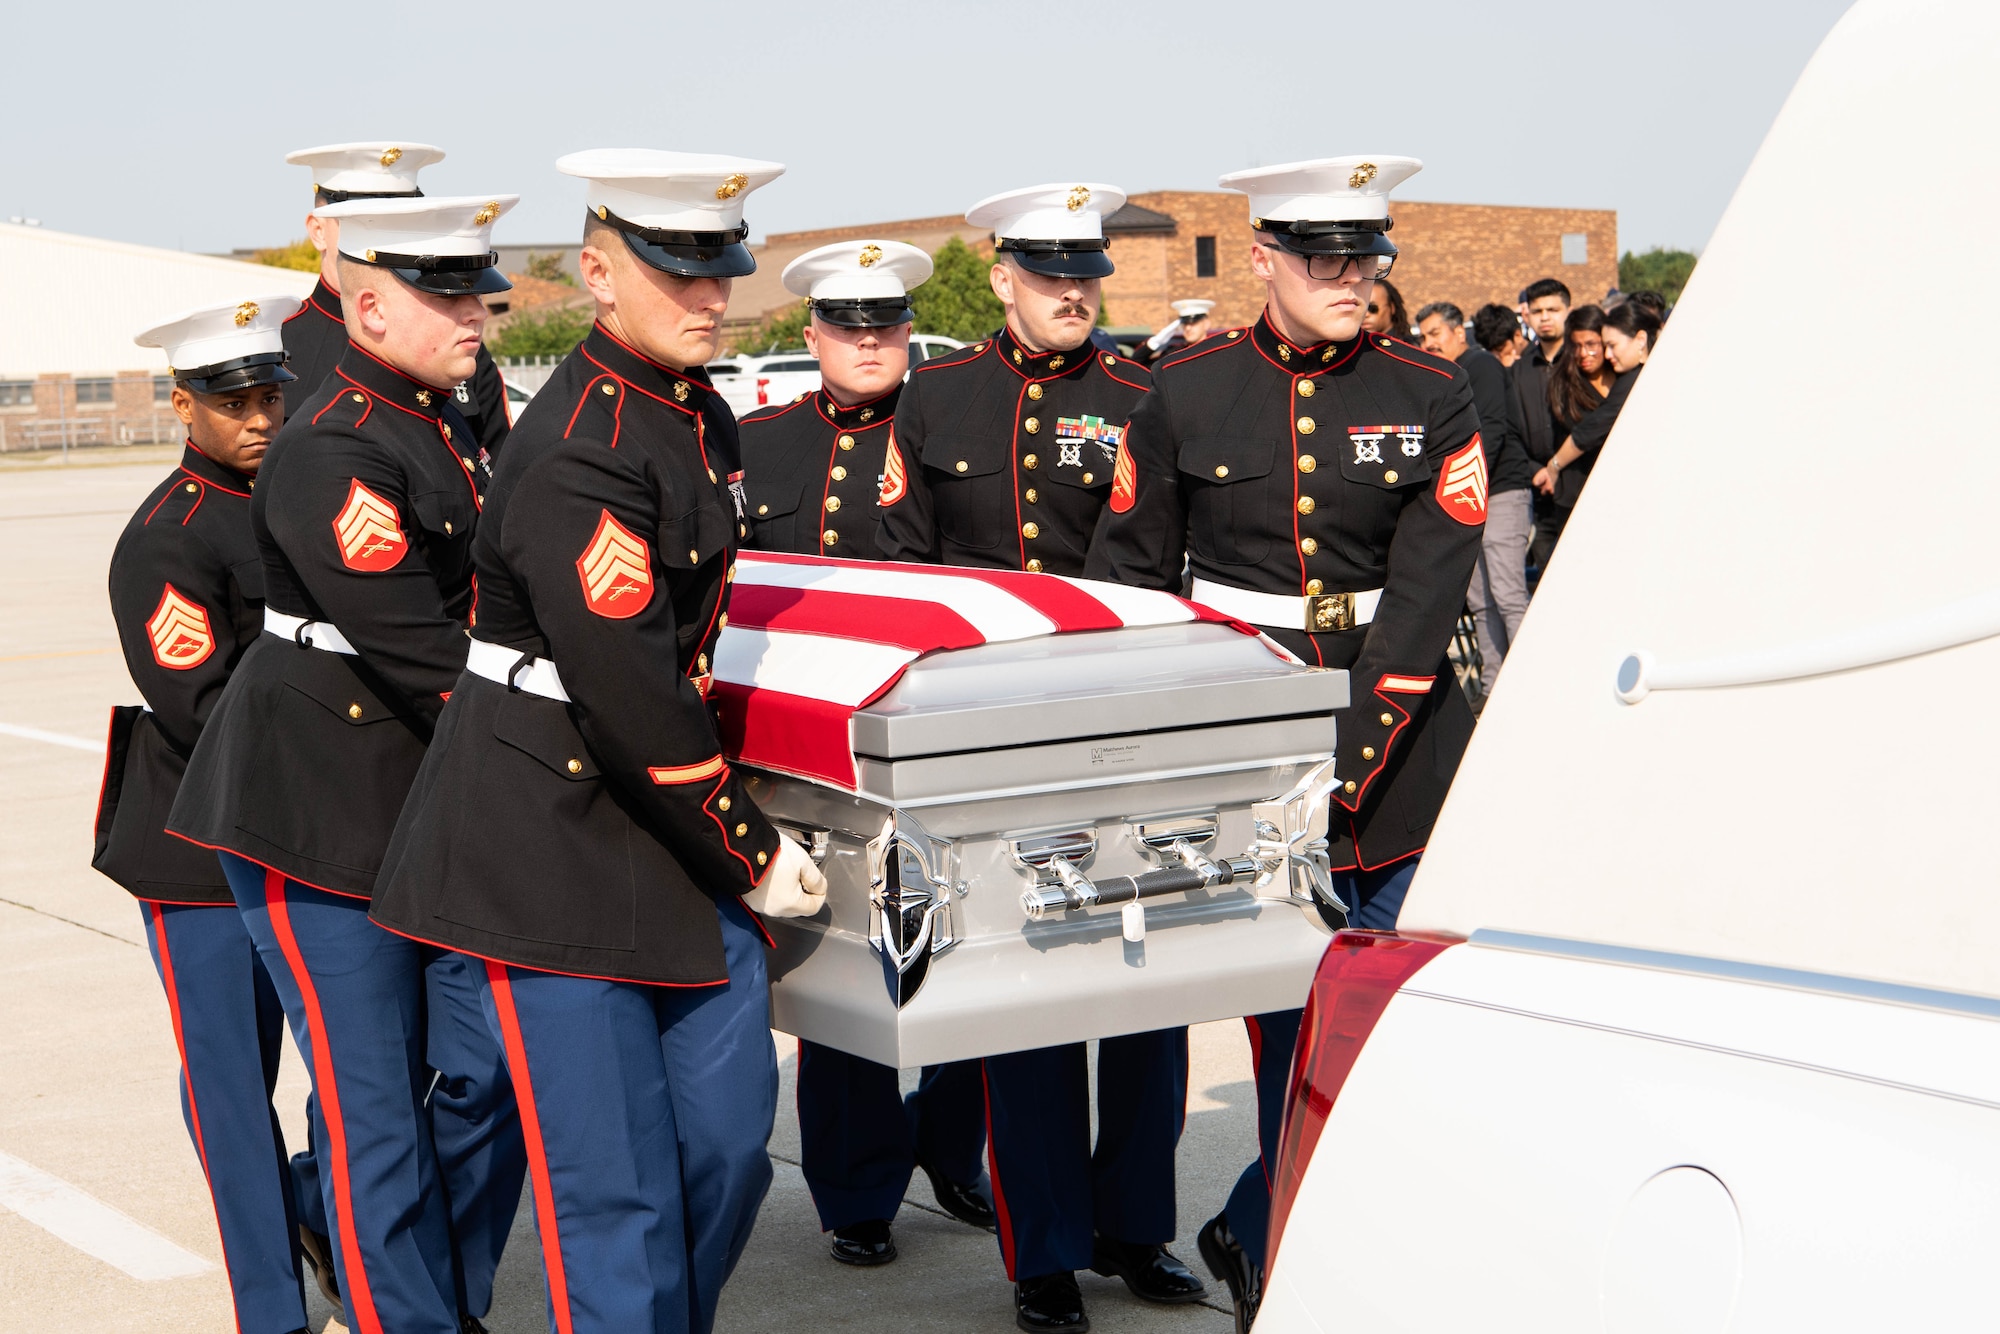 Marines from Detachment 1, Communications Company, Combat Logistics Regiment 45, 4th Marine Logistics Group, carry the casket of U.S. Marine Corps Cpl. Humberto A. Sanchez of Logansport, Indiana, Sept. 12, 2021 at Grissom Air Reserve Base, Indiana. Sanchez was assigned to 2nd Battalion, 1st Marine Regiment, 1st Marine Division, I Marine Expeditionary Force, Camp Pendleton, California. (U.S. Air Force photo by Master Sgt. Benjamin Mota)